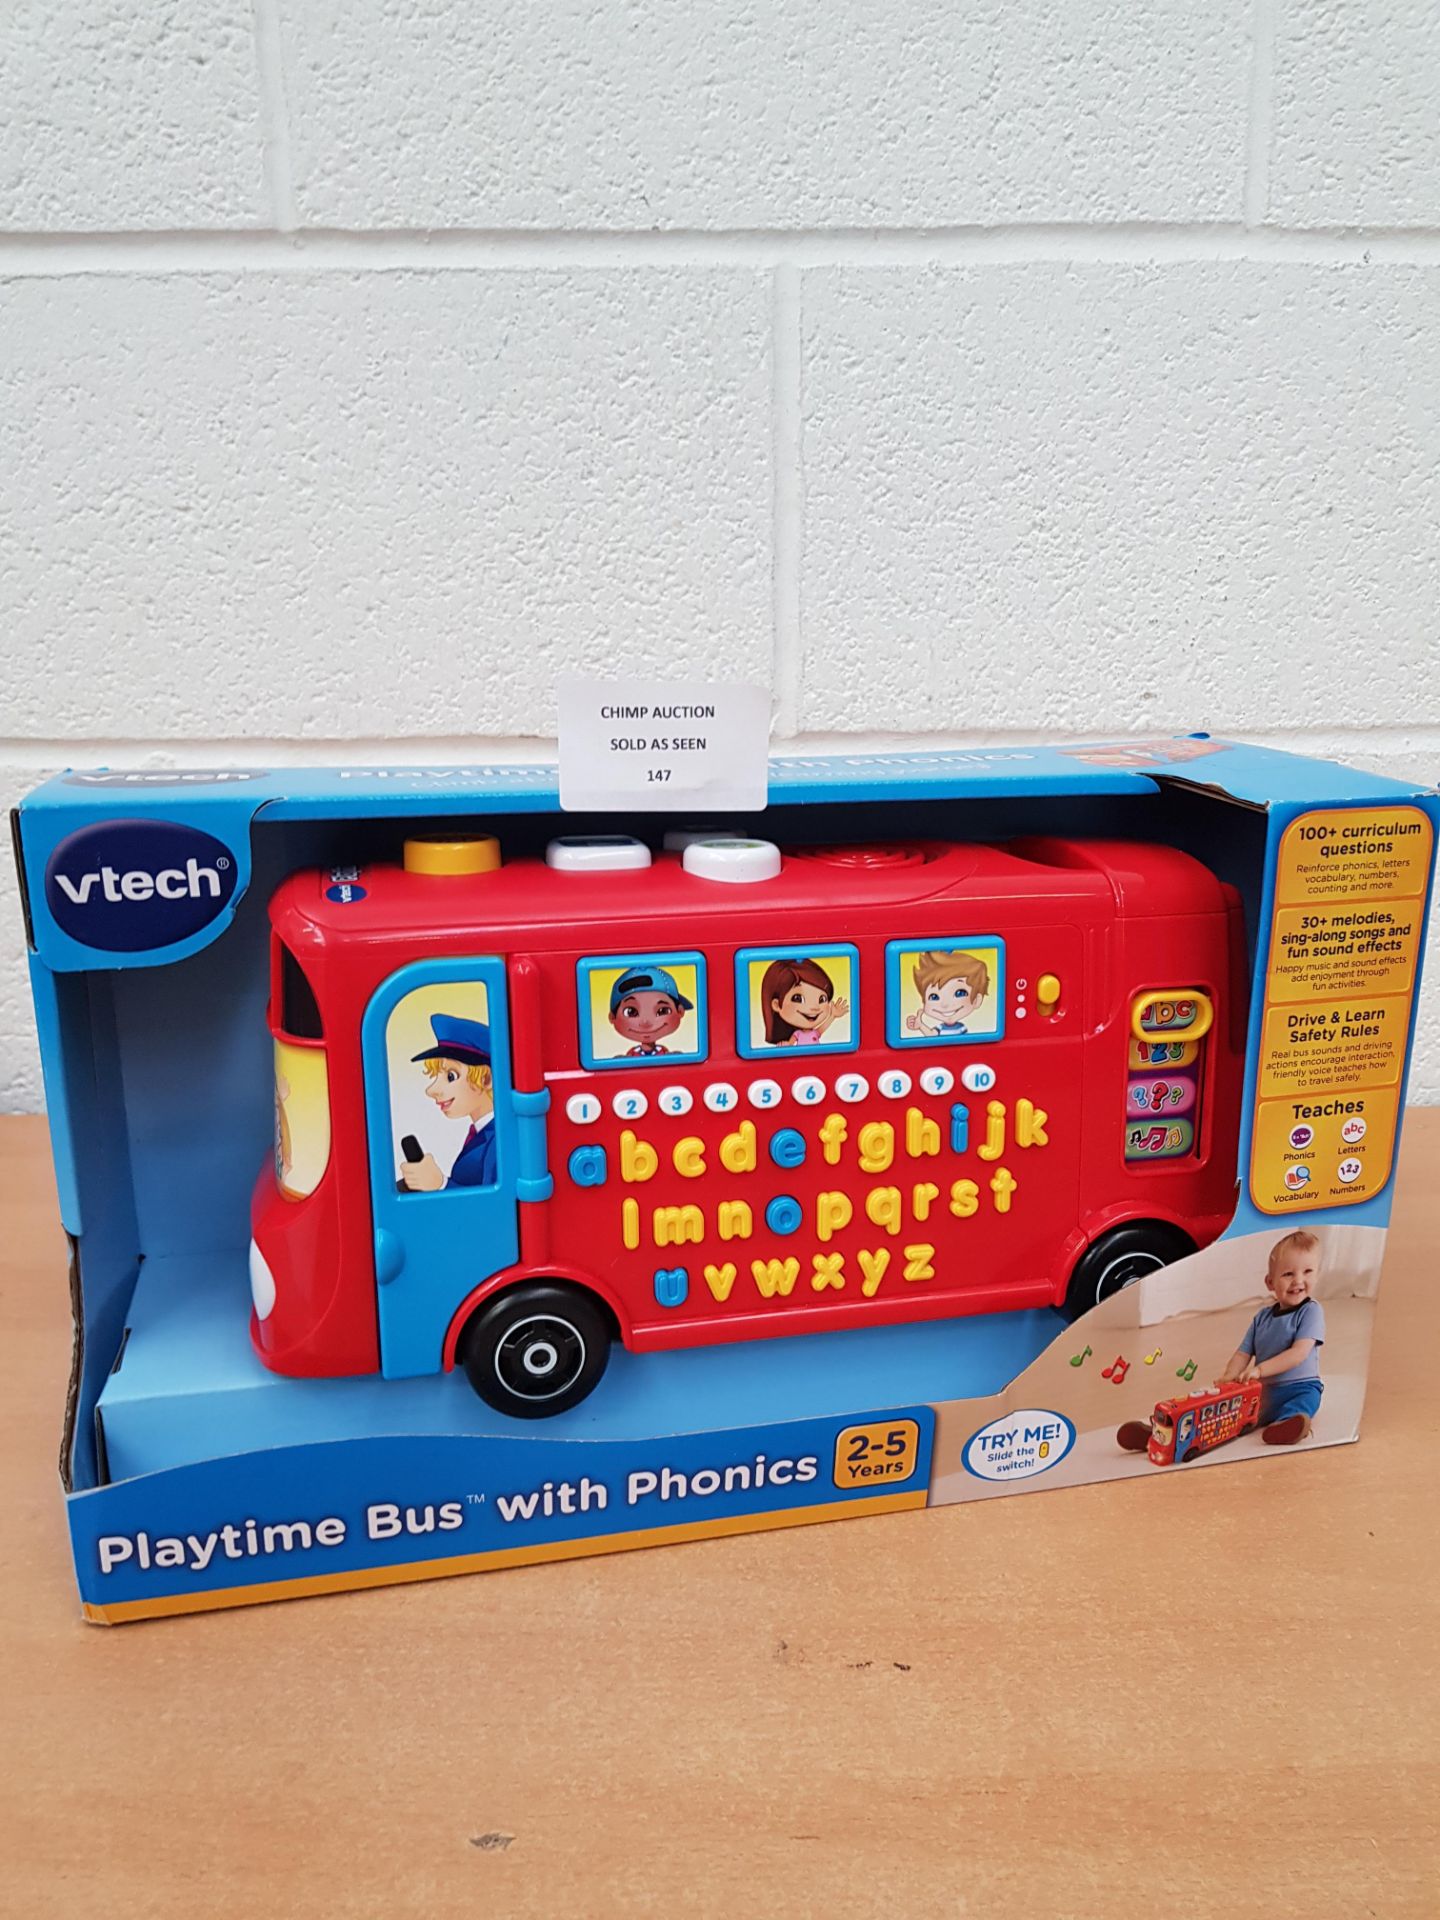 Vtech Playtime Bus with Phonics Playset